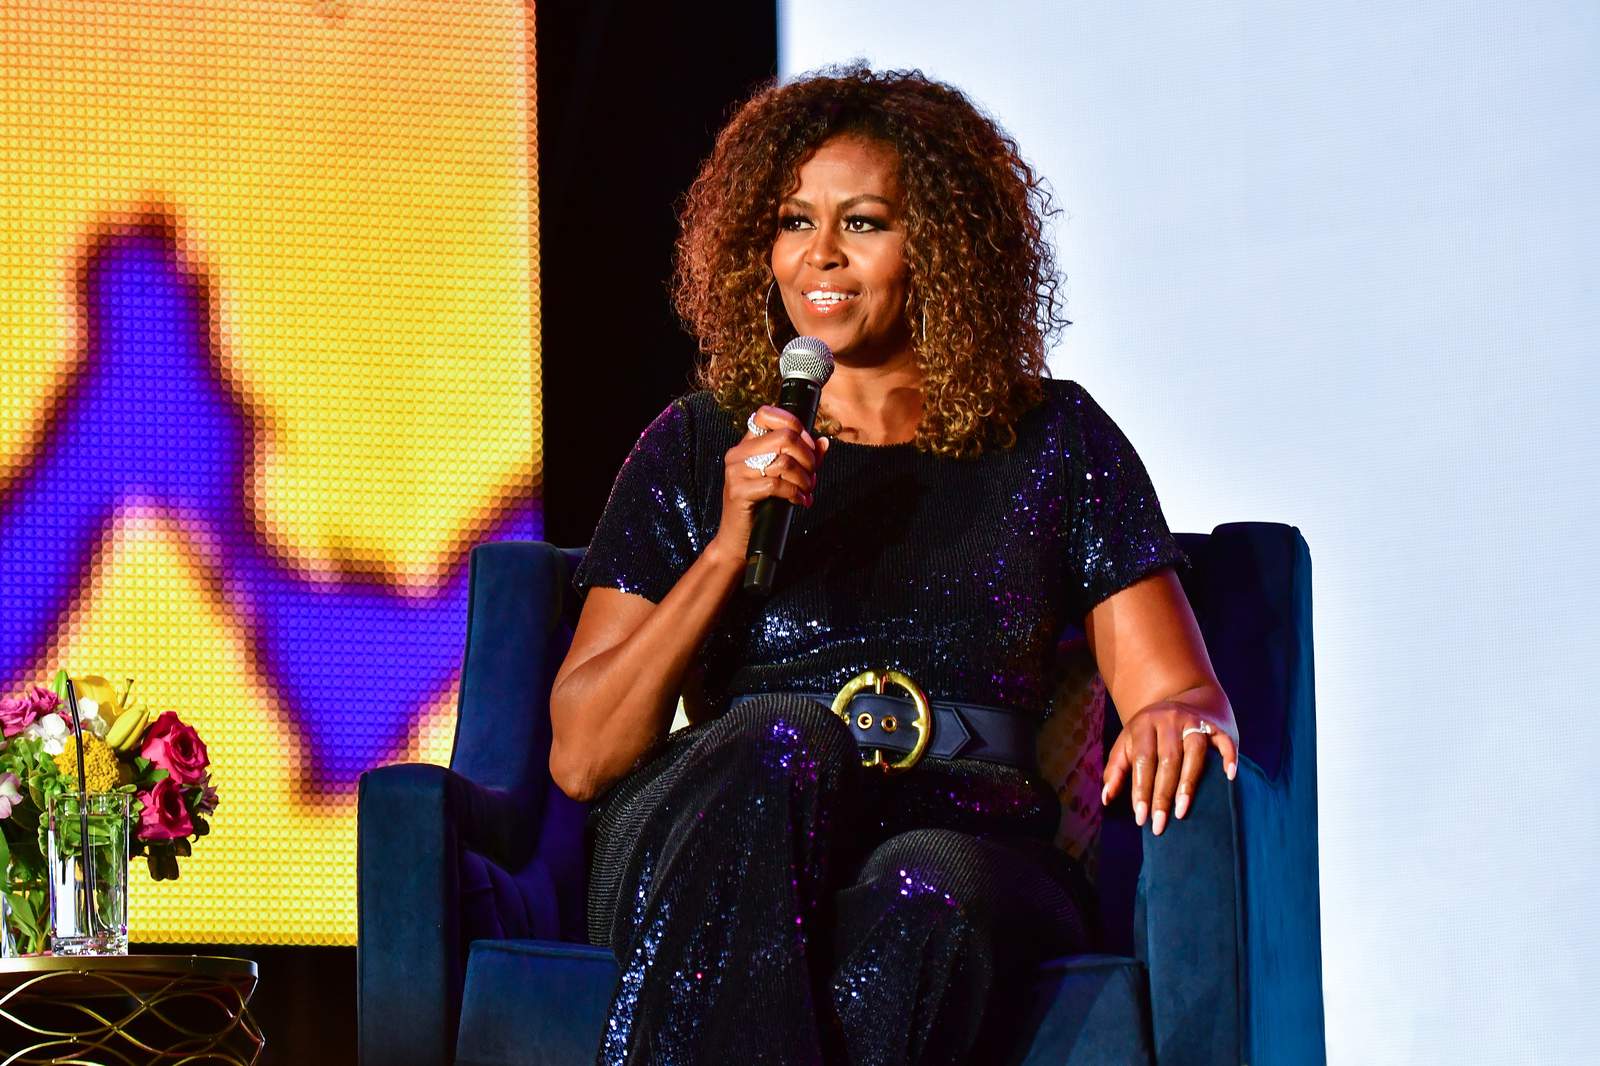 Michelle Obama is launching a podcast on Spotify